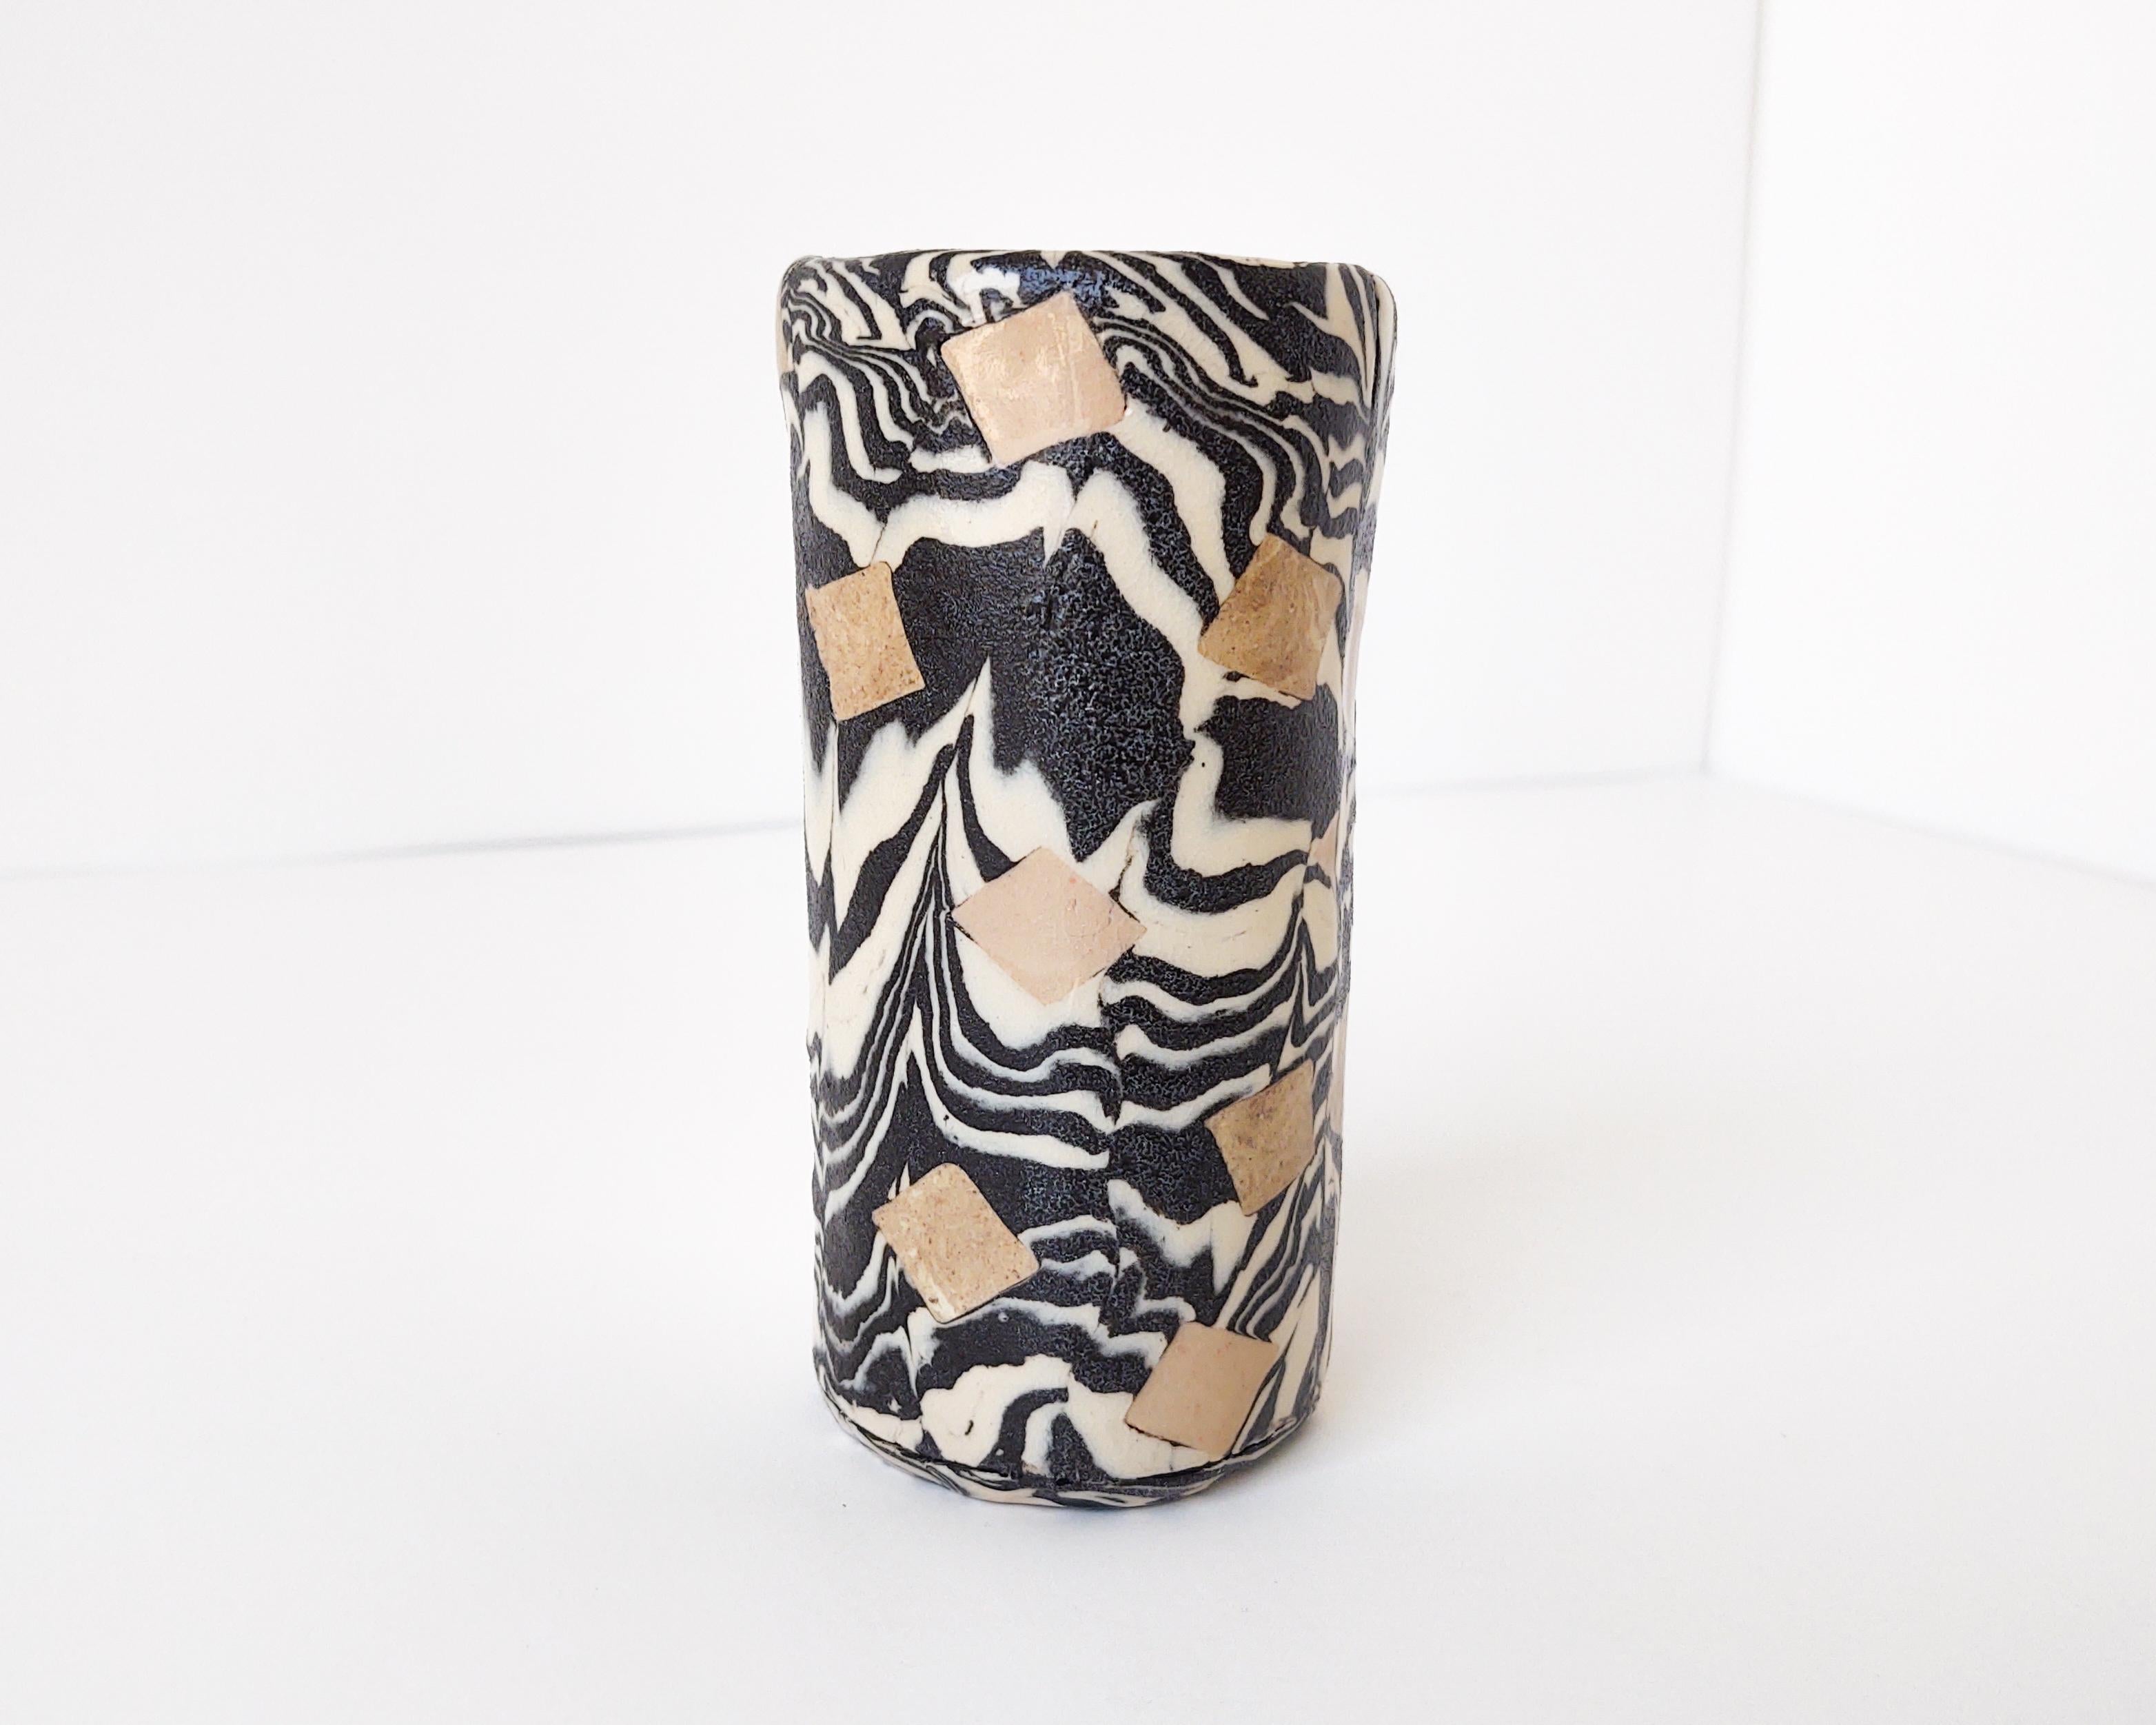 Handmade nerikomi vase with three different clays. Black and white zebra stripes interrupted with beige square inlays. Made and fired in Los Angeles by Fizzy Ceramics in 2020. Glazed clear on the outside and inside. Fired to cone 5 in oxidation,